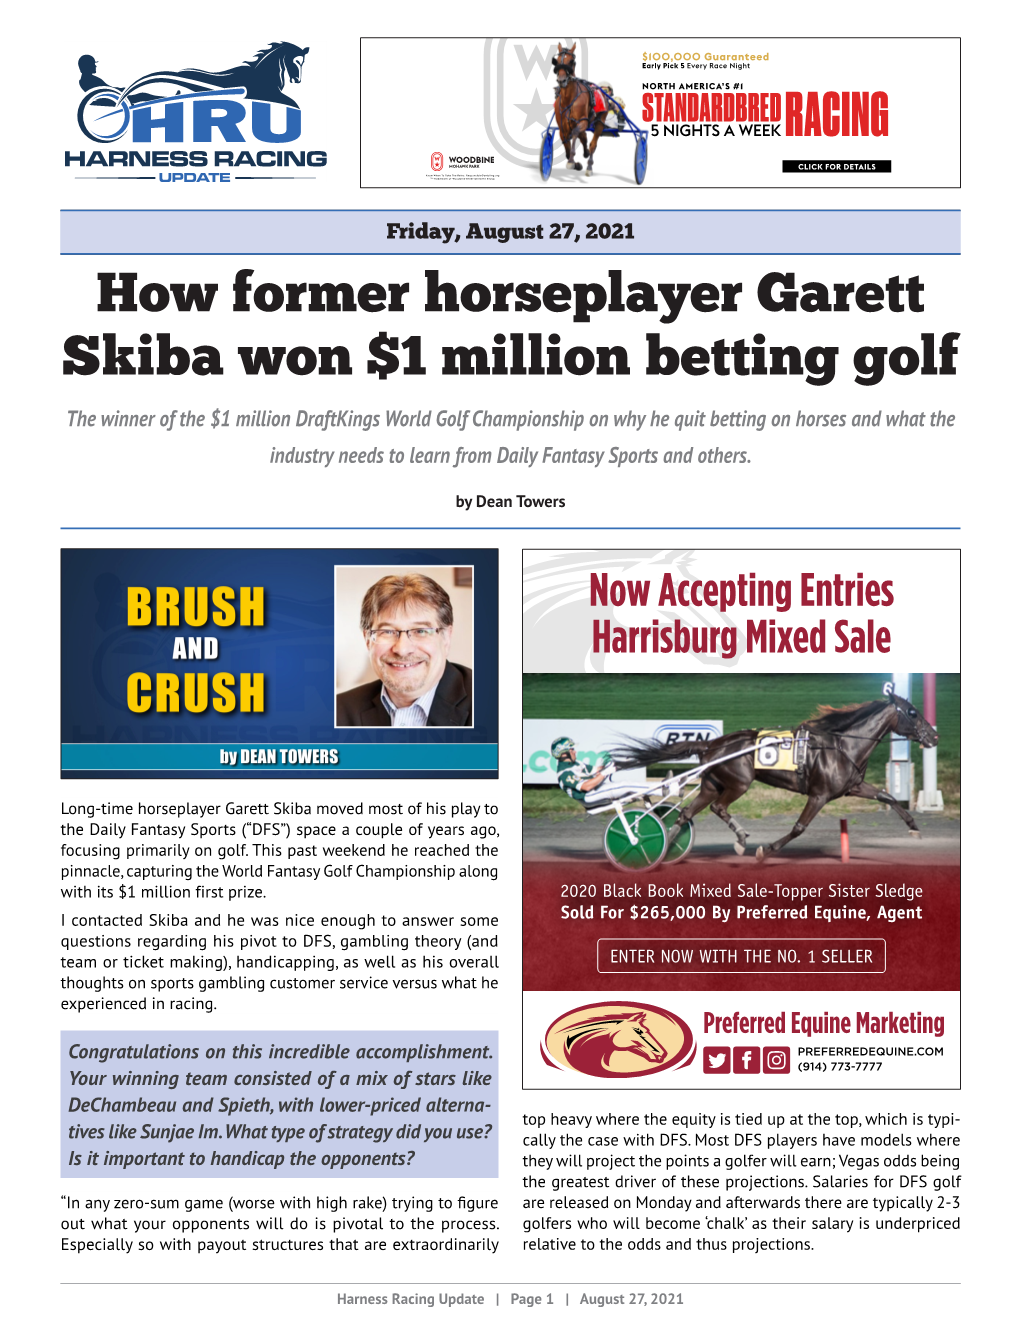 Download the Most Recent Edition of Harness Racing Update